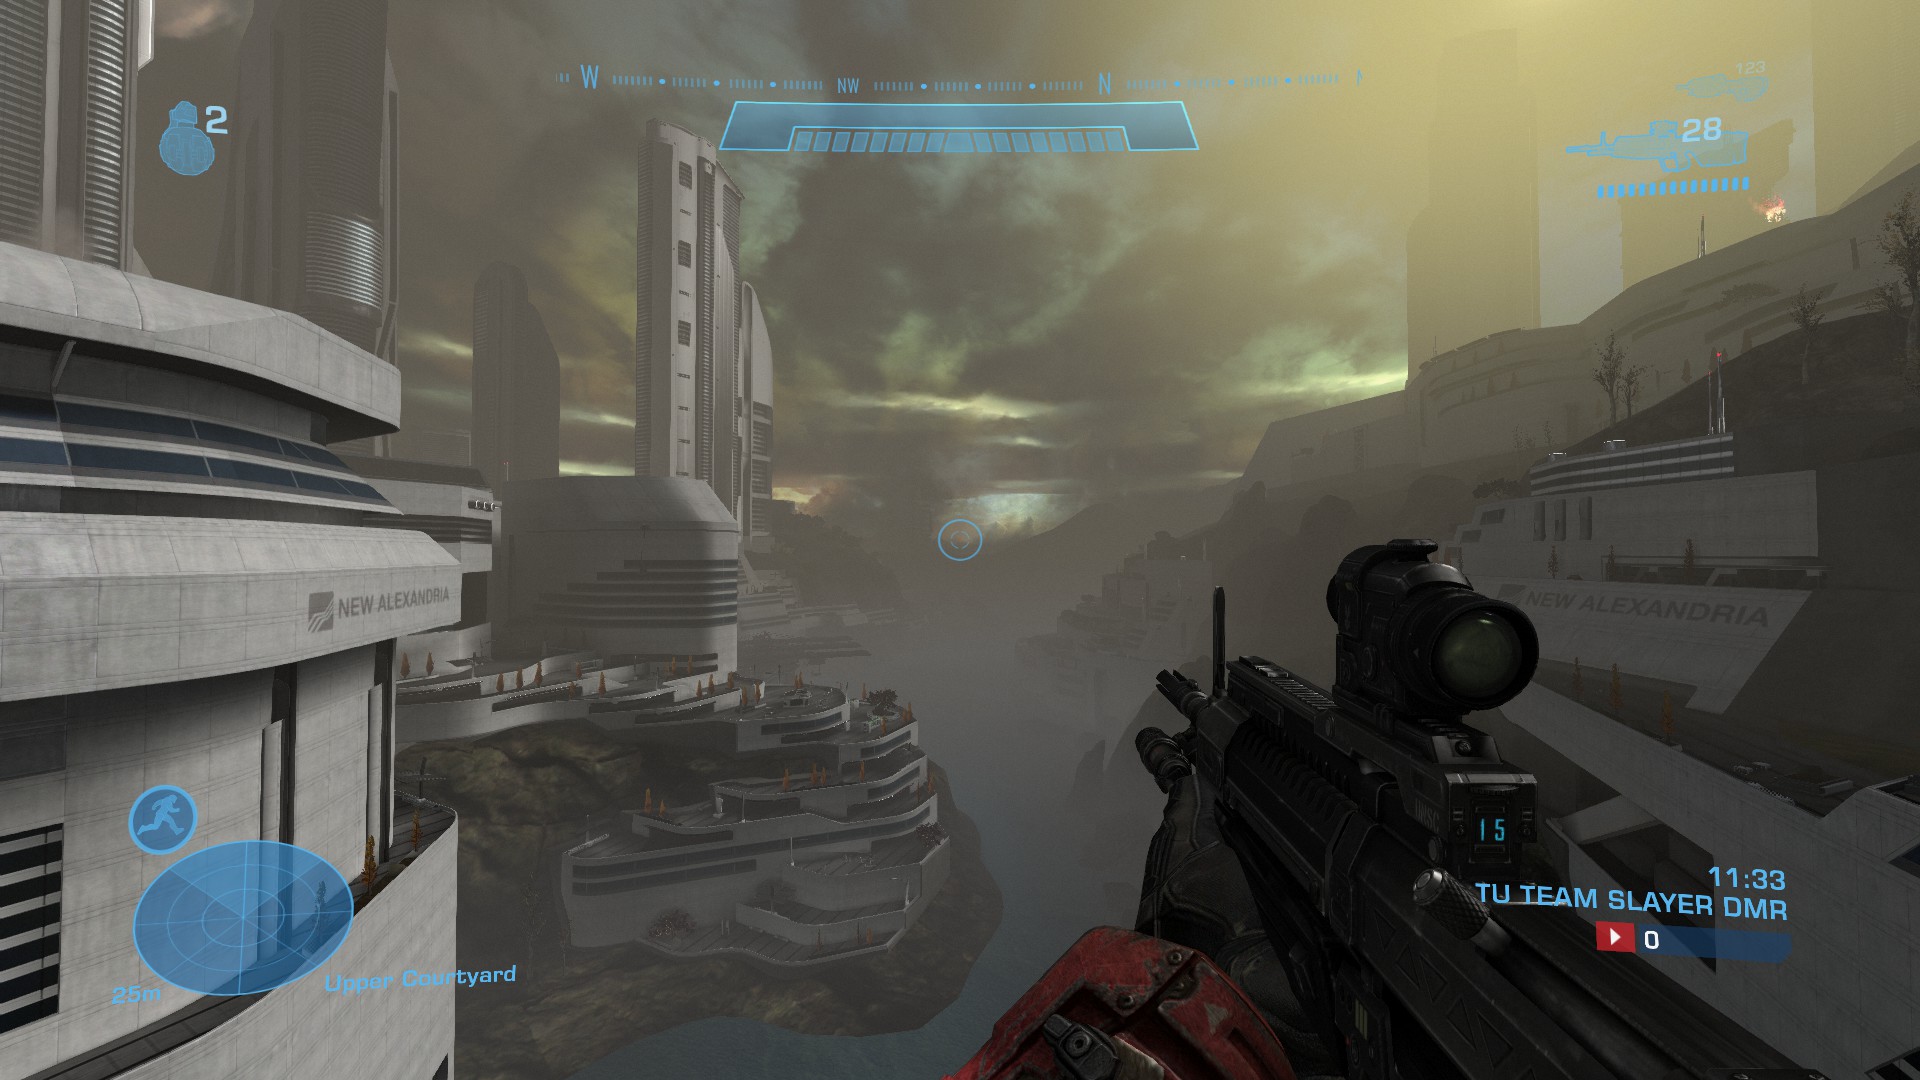 Halo: The Master Chief Collection How to Viewmodels in game guide - Halo: Reach - 293B2E8